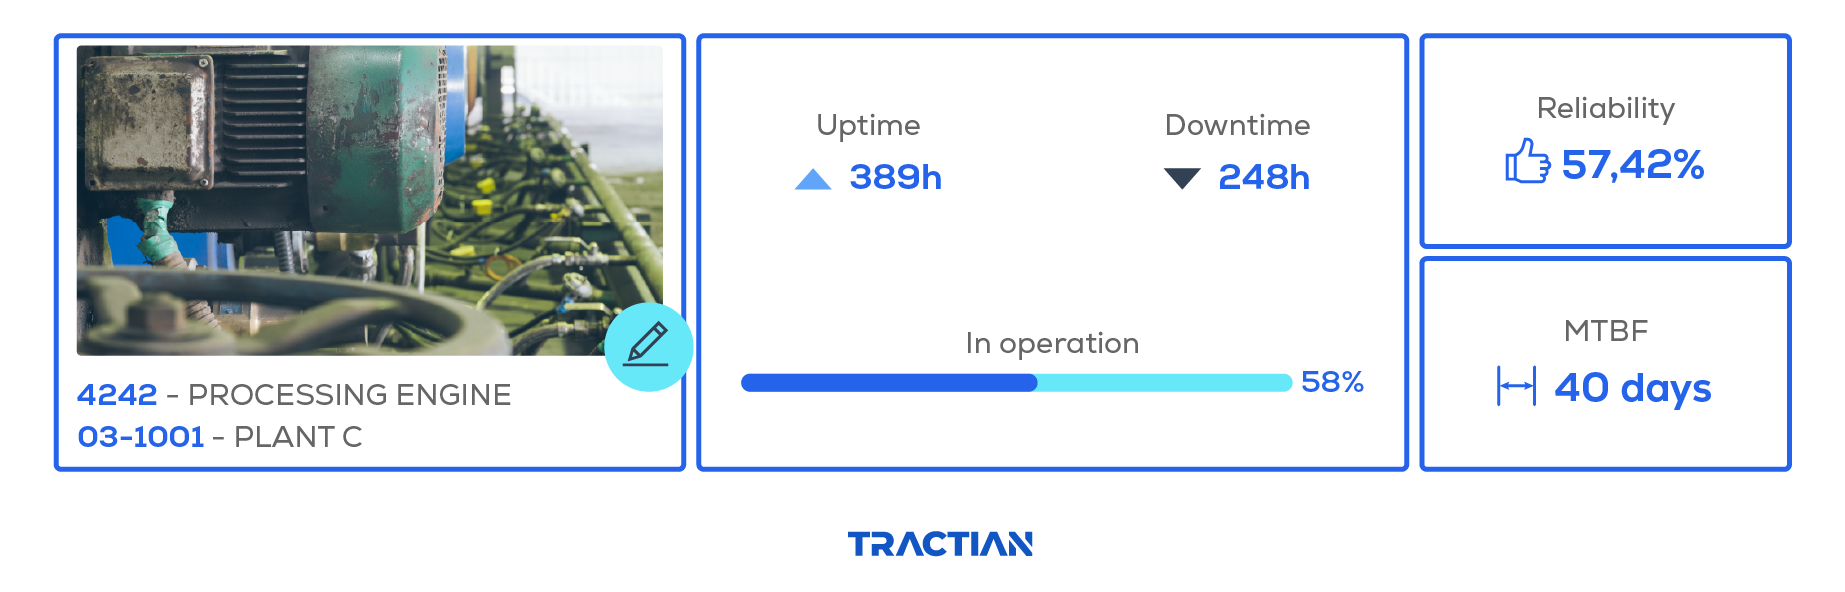 TRACTIAN Platform - MTBFi (Mean Time Between Checked Failure Insights)